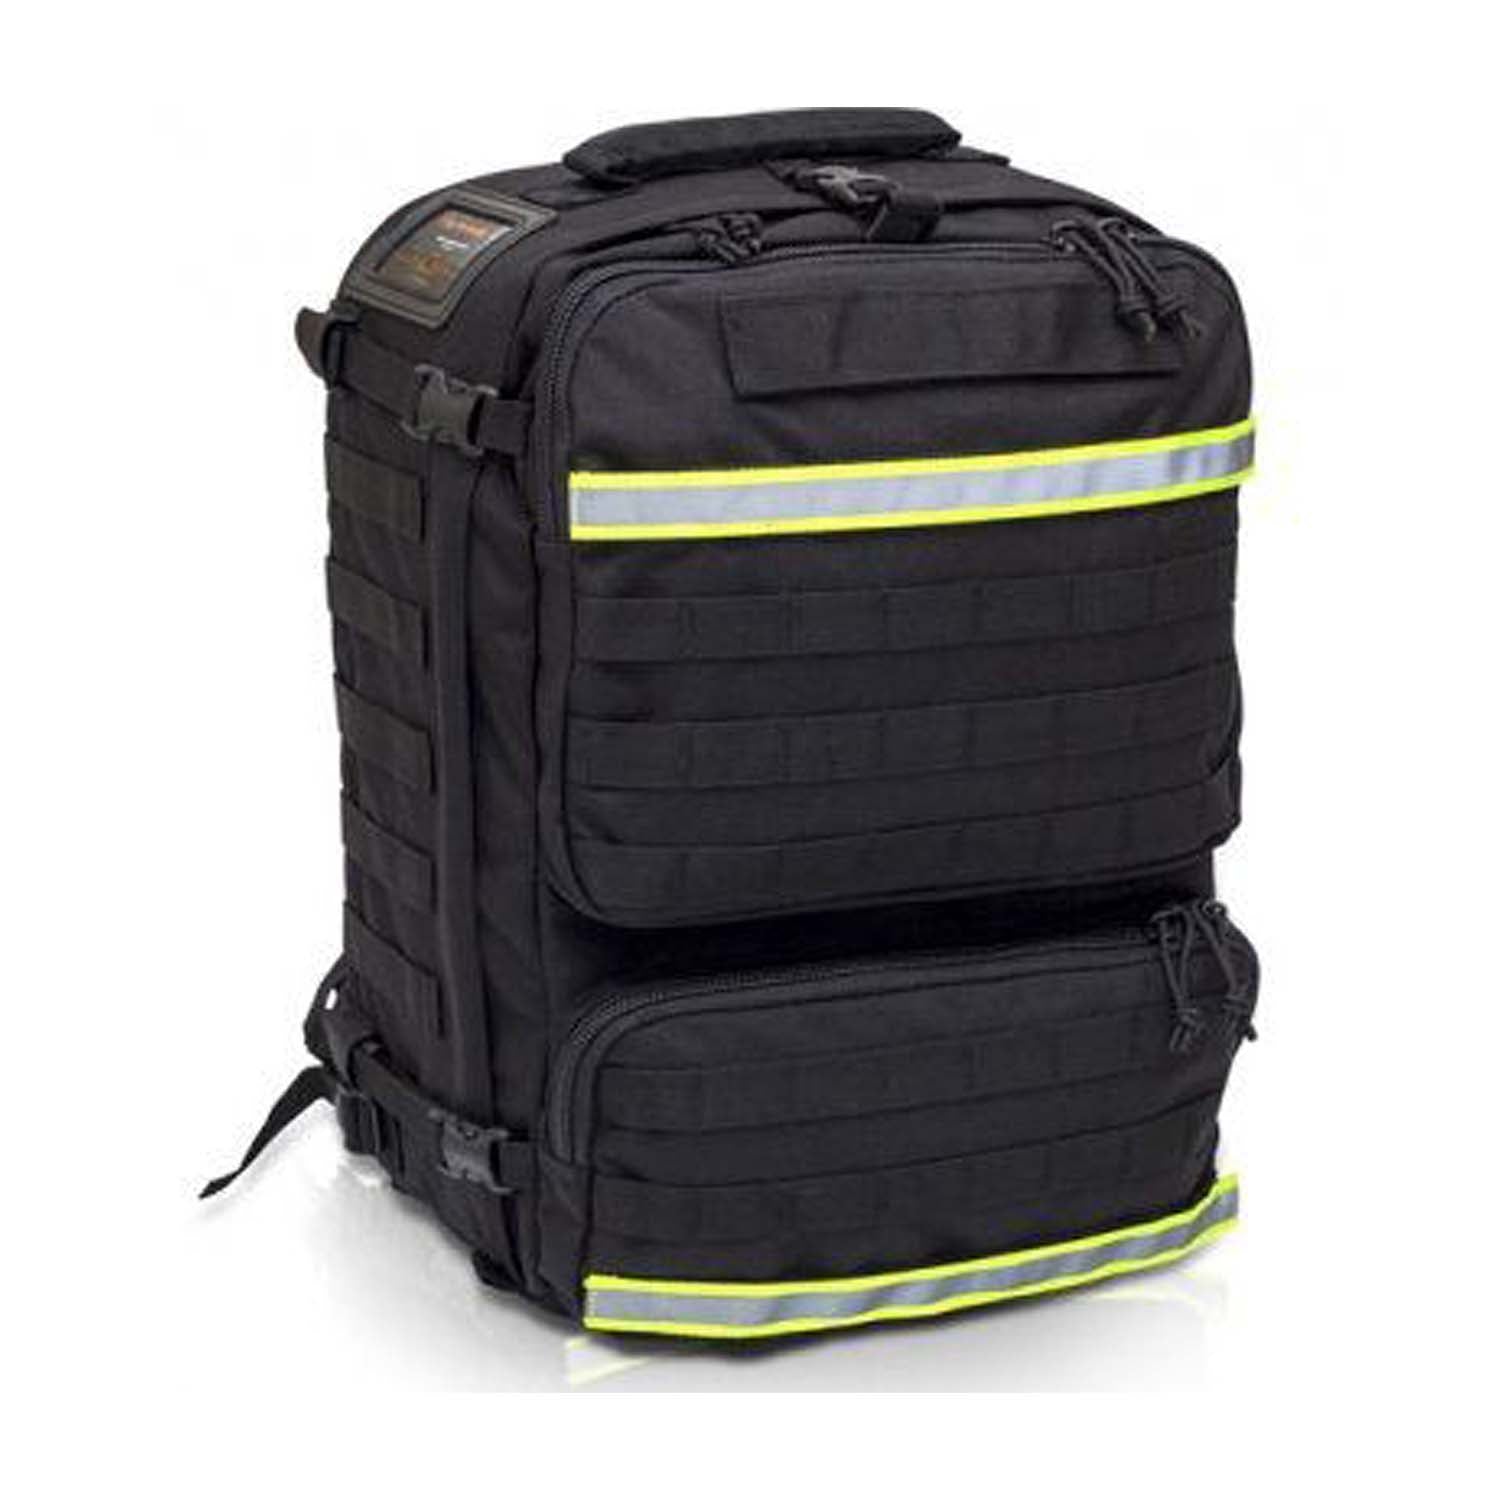 Paramed's Tactical Rescue Backpack | Black